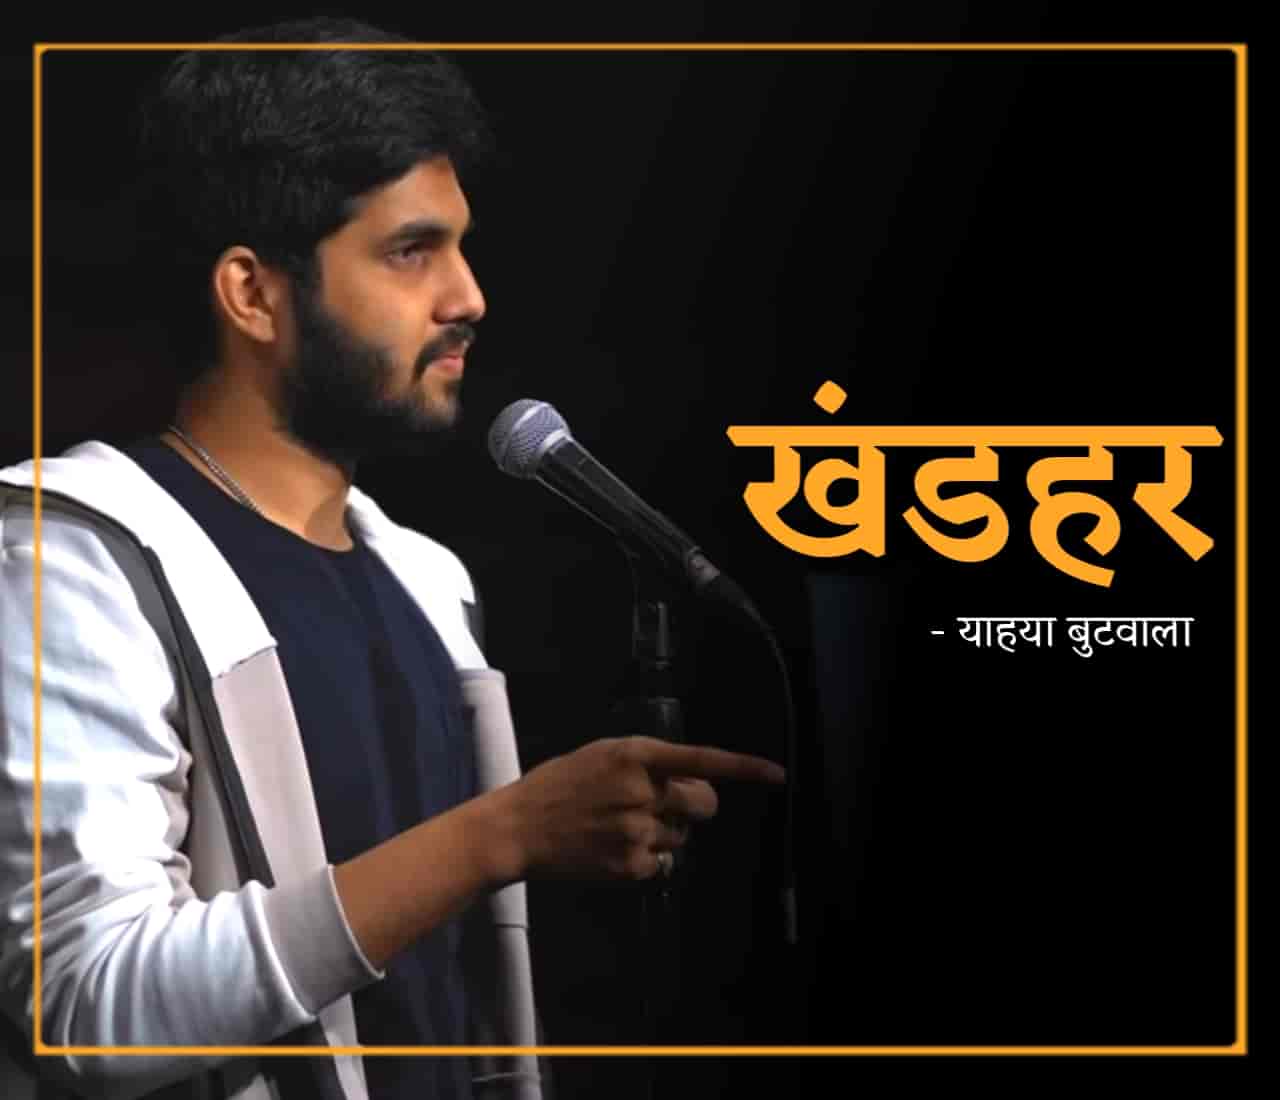 This beautiful positive Poetry 'Khandar' which is written and performed by Yahya Bootwala